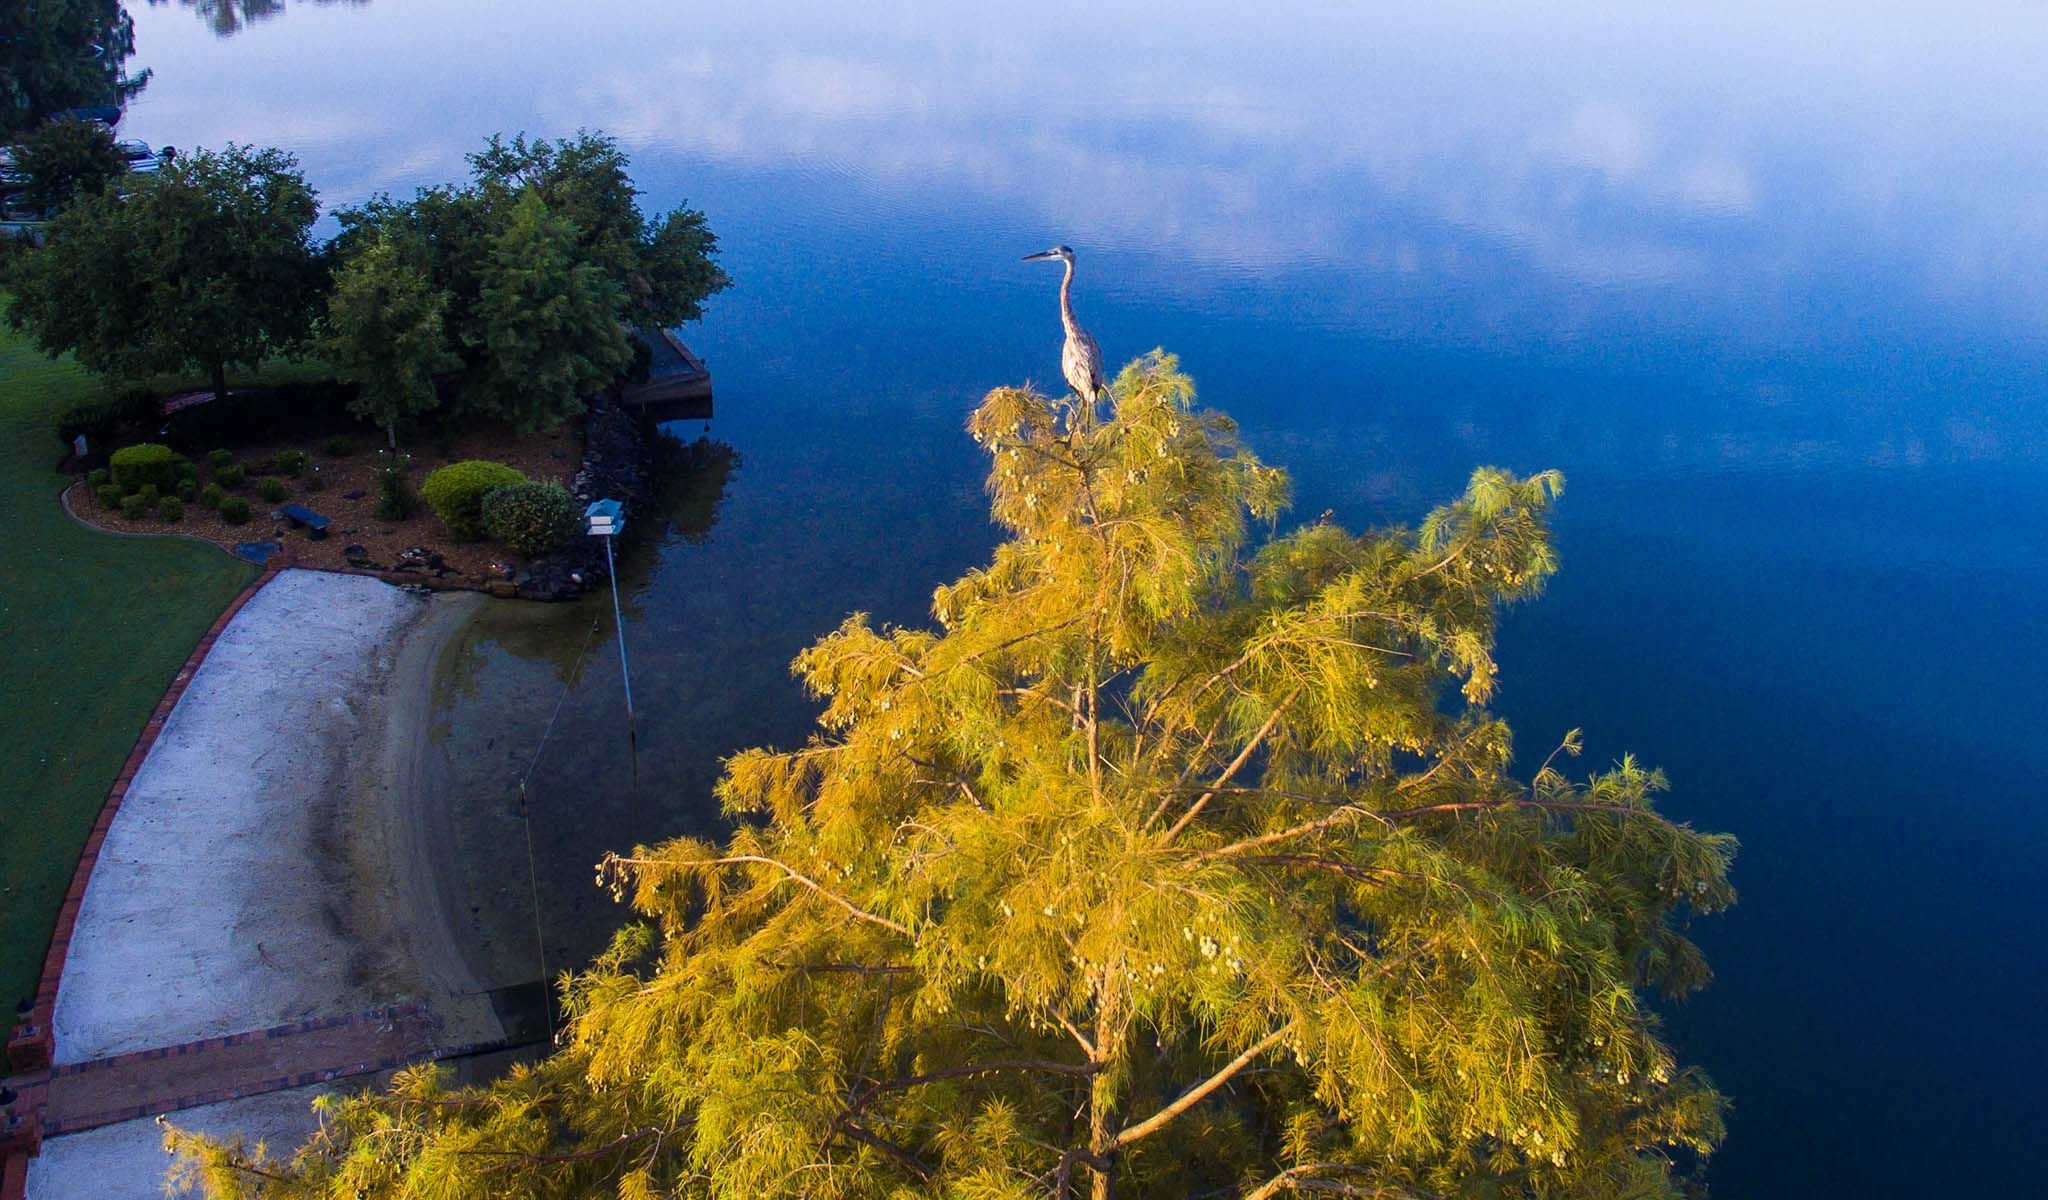 Great Blue Heron in the top of a Cypress tree